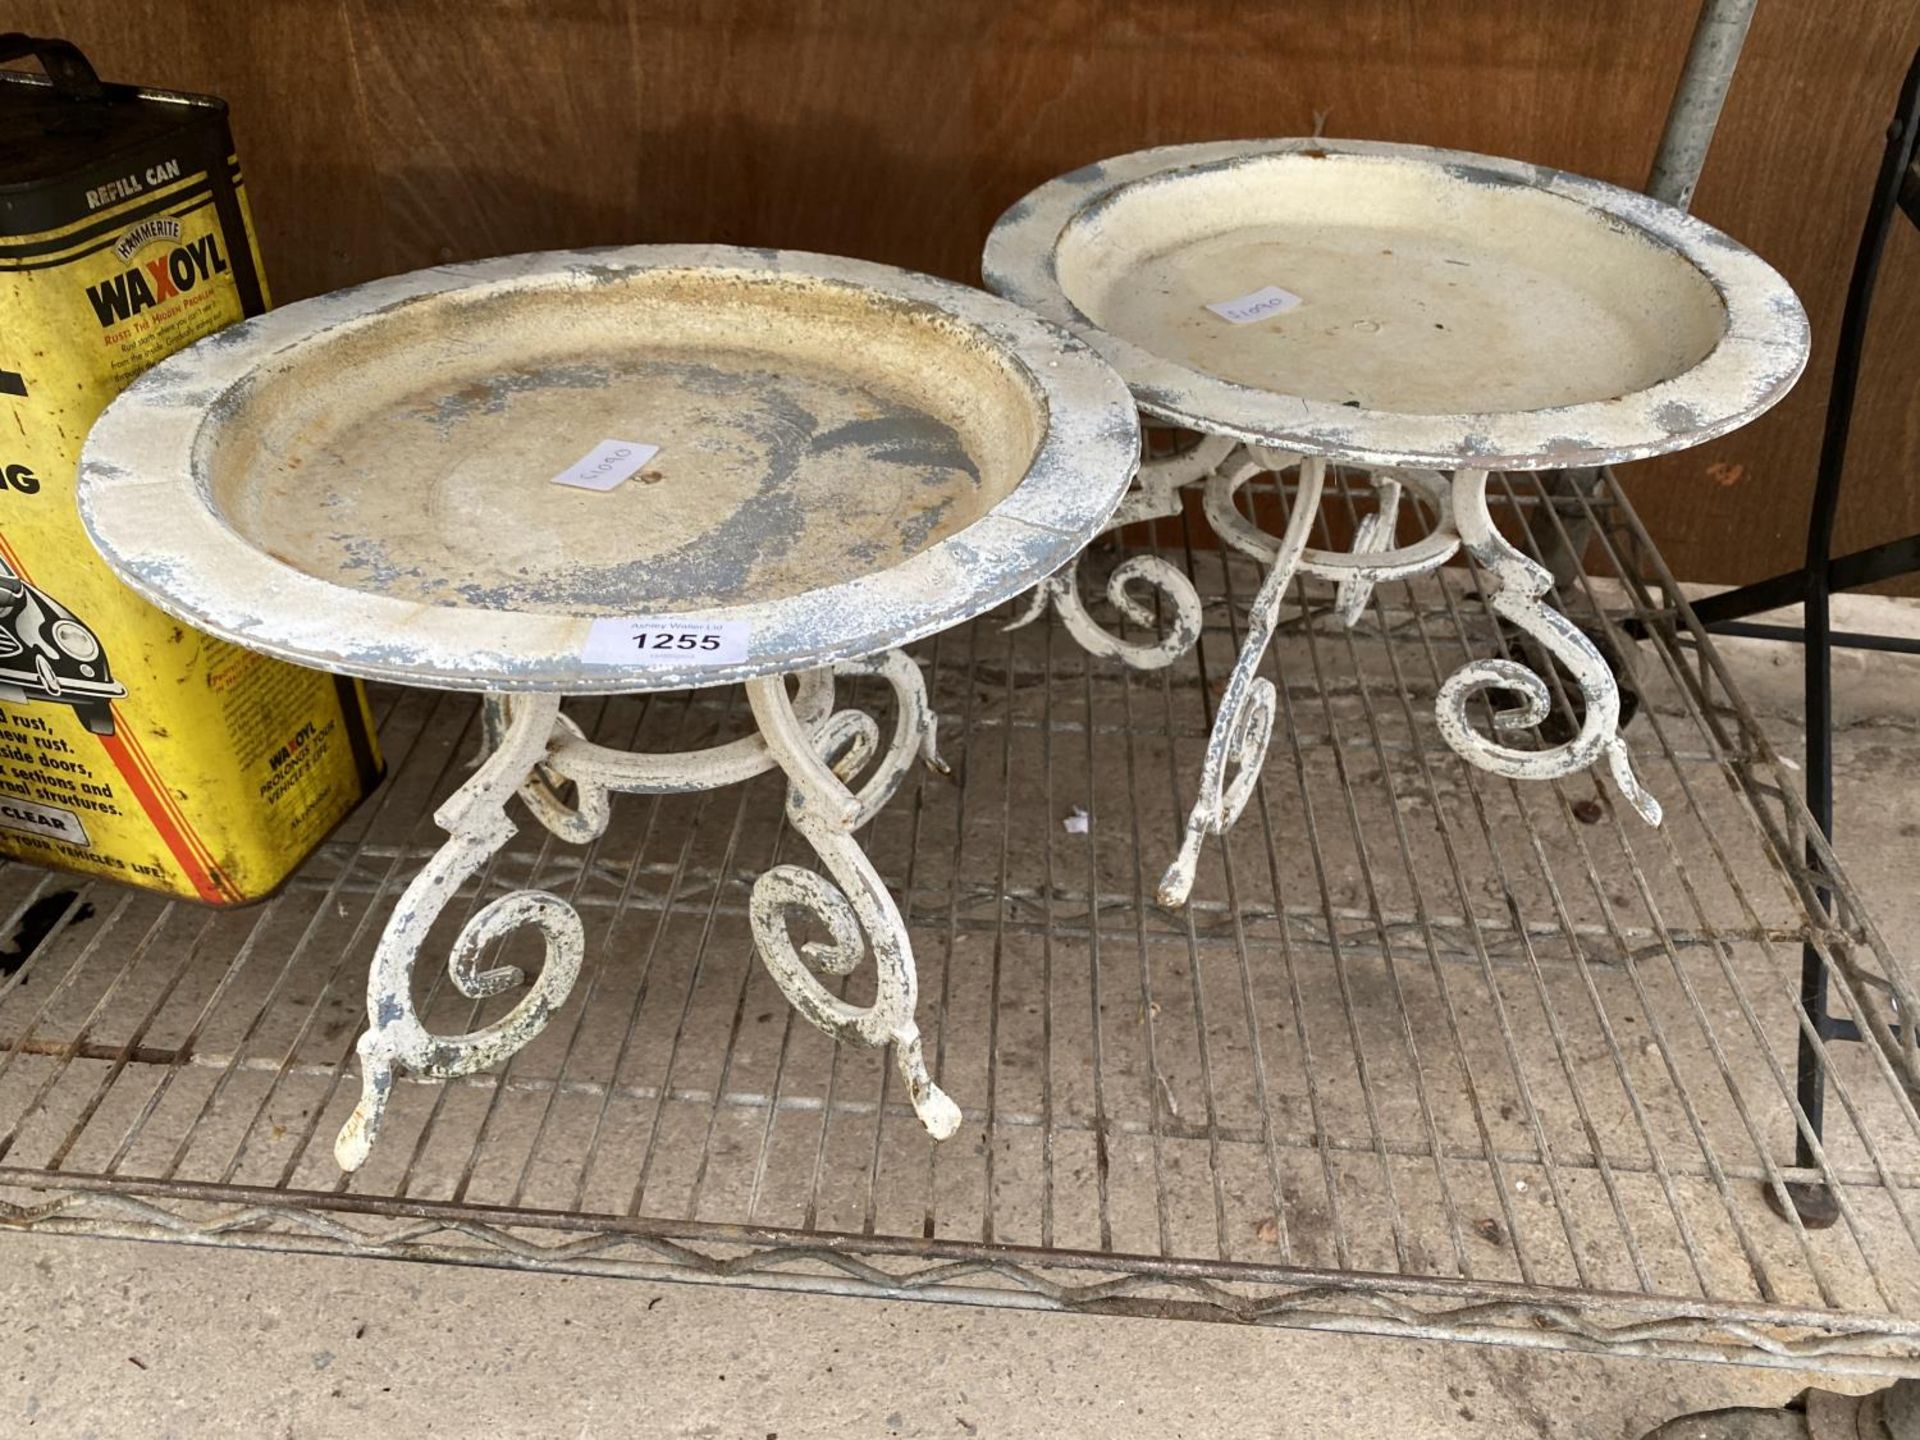 A PAIR OF ROUND METAL TRIPOD PLANT STANDS